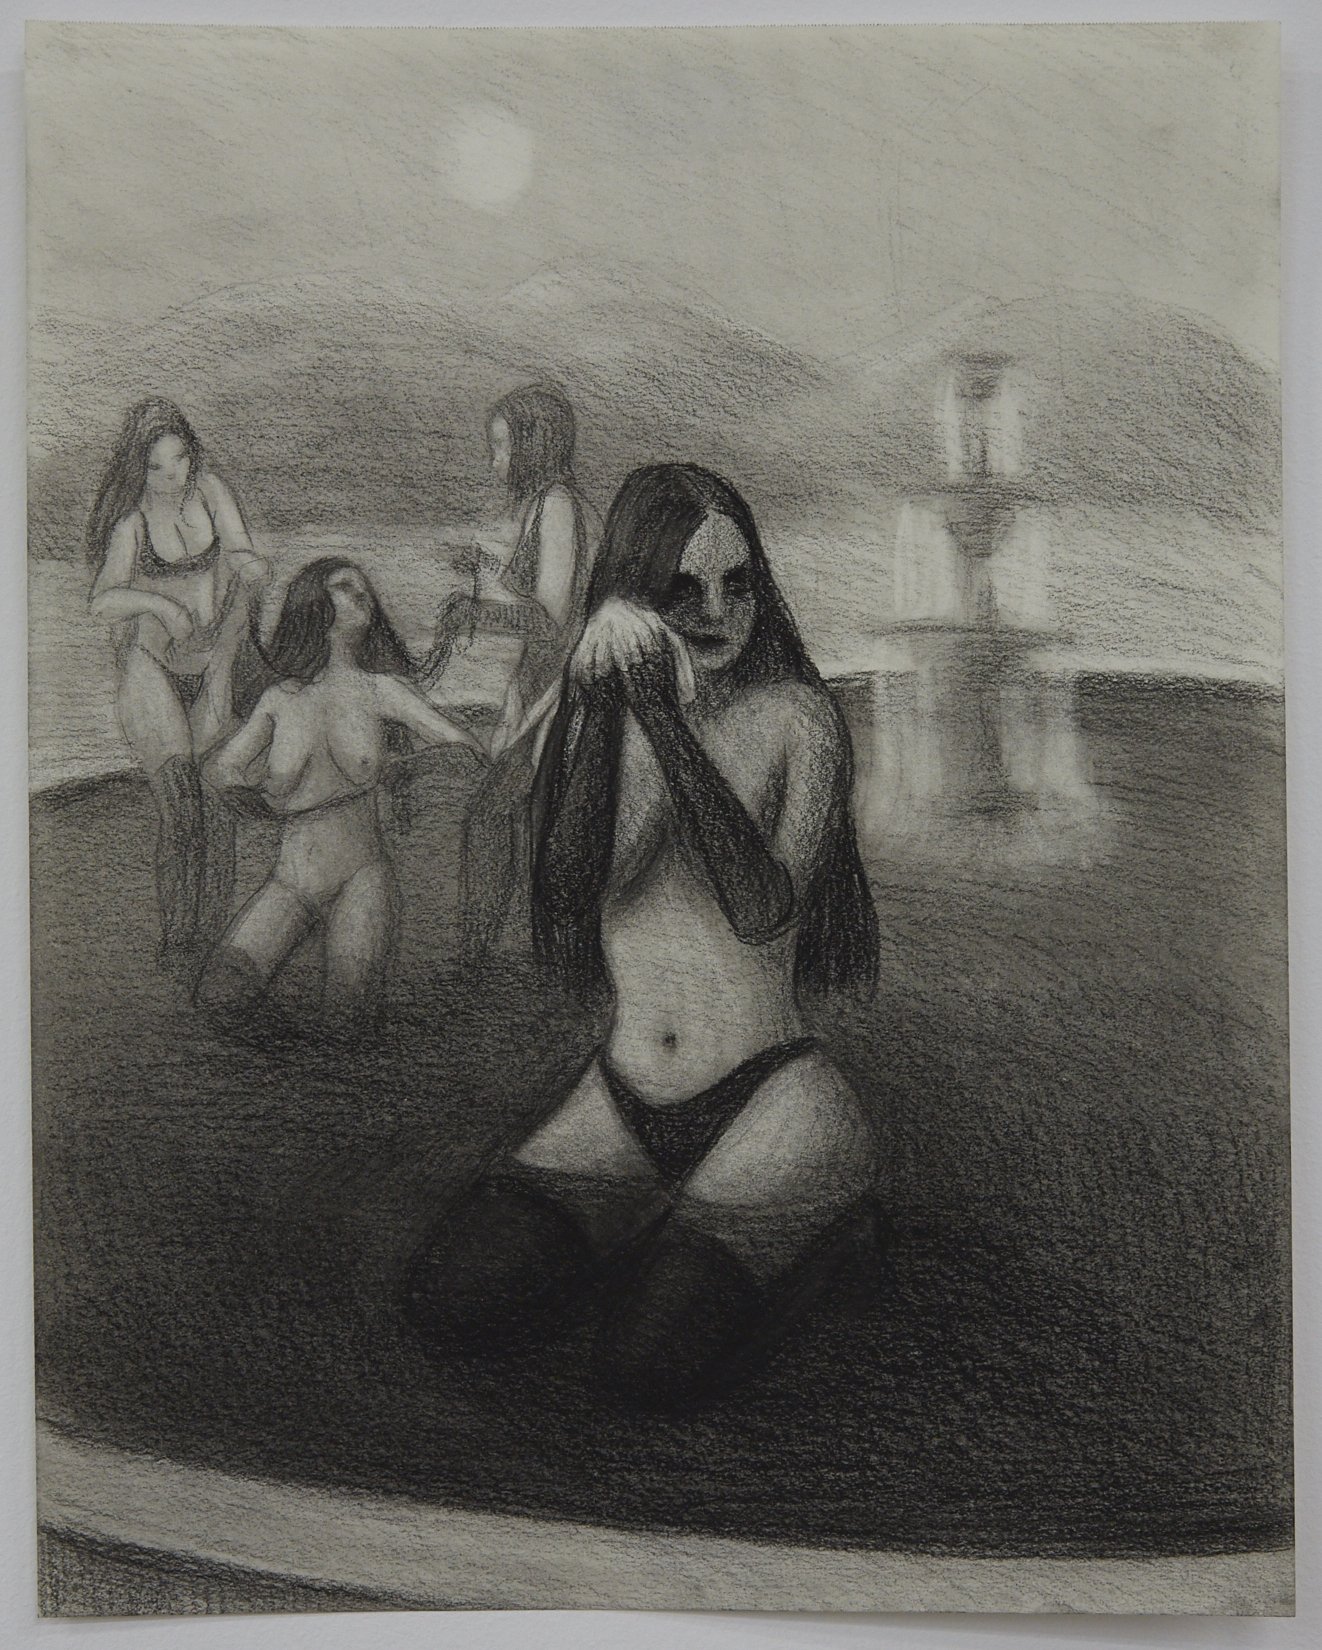   Washing , 14x11in, charcoal on paper, 2021 